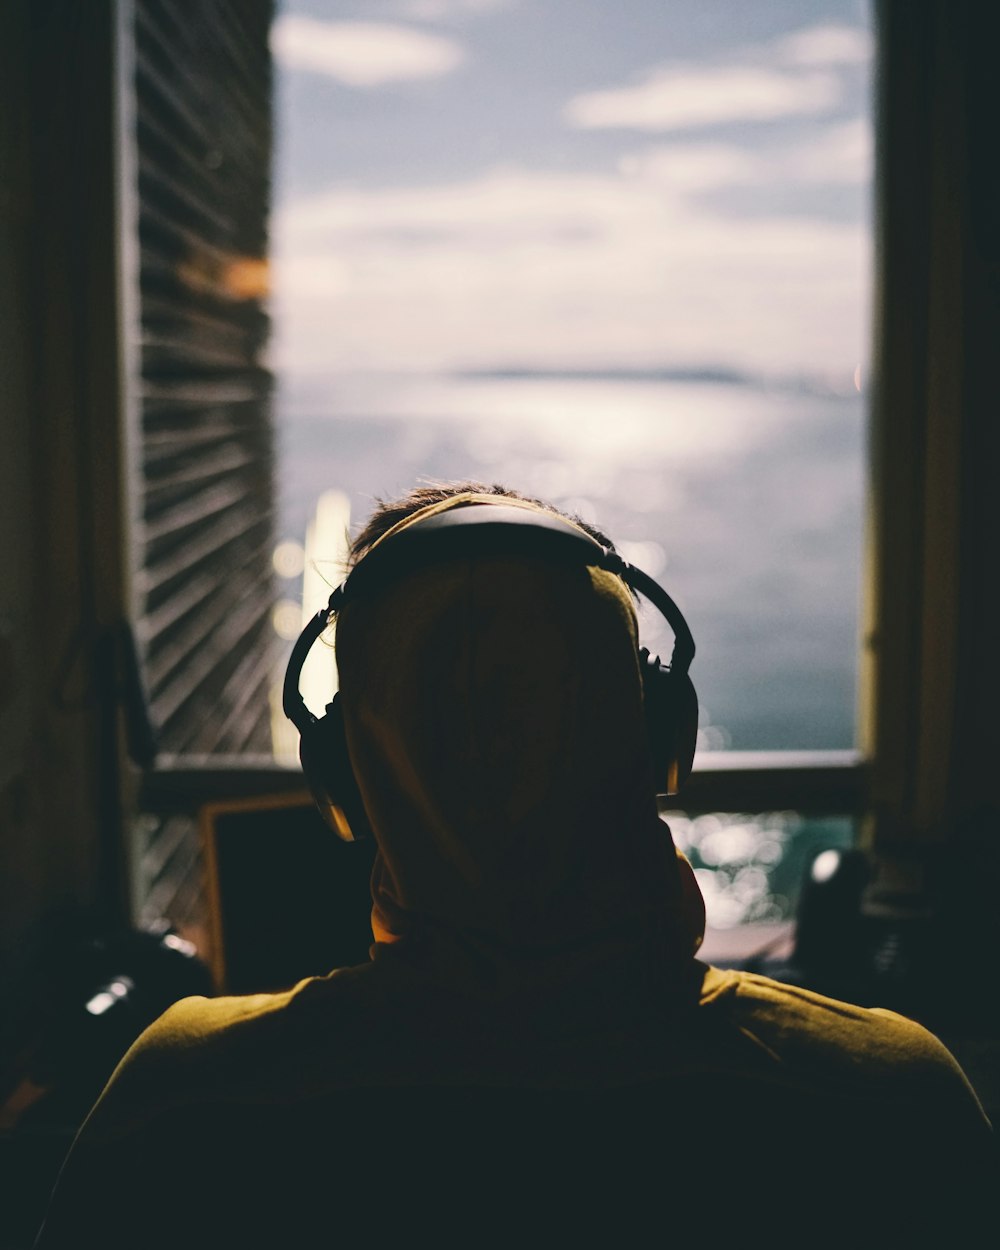 tilt-shift lens photography of person wearing headphones facing body of water through window of a dark room